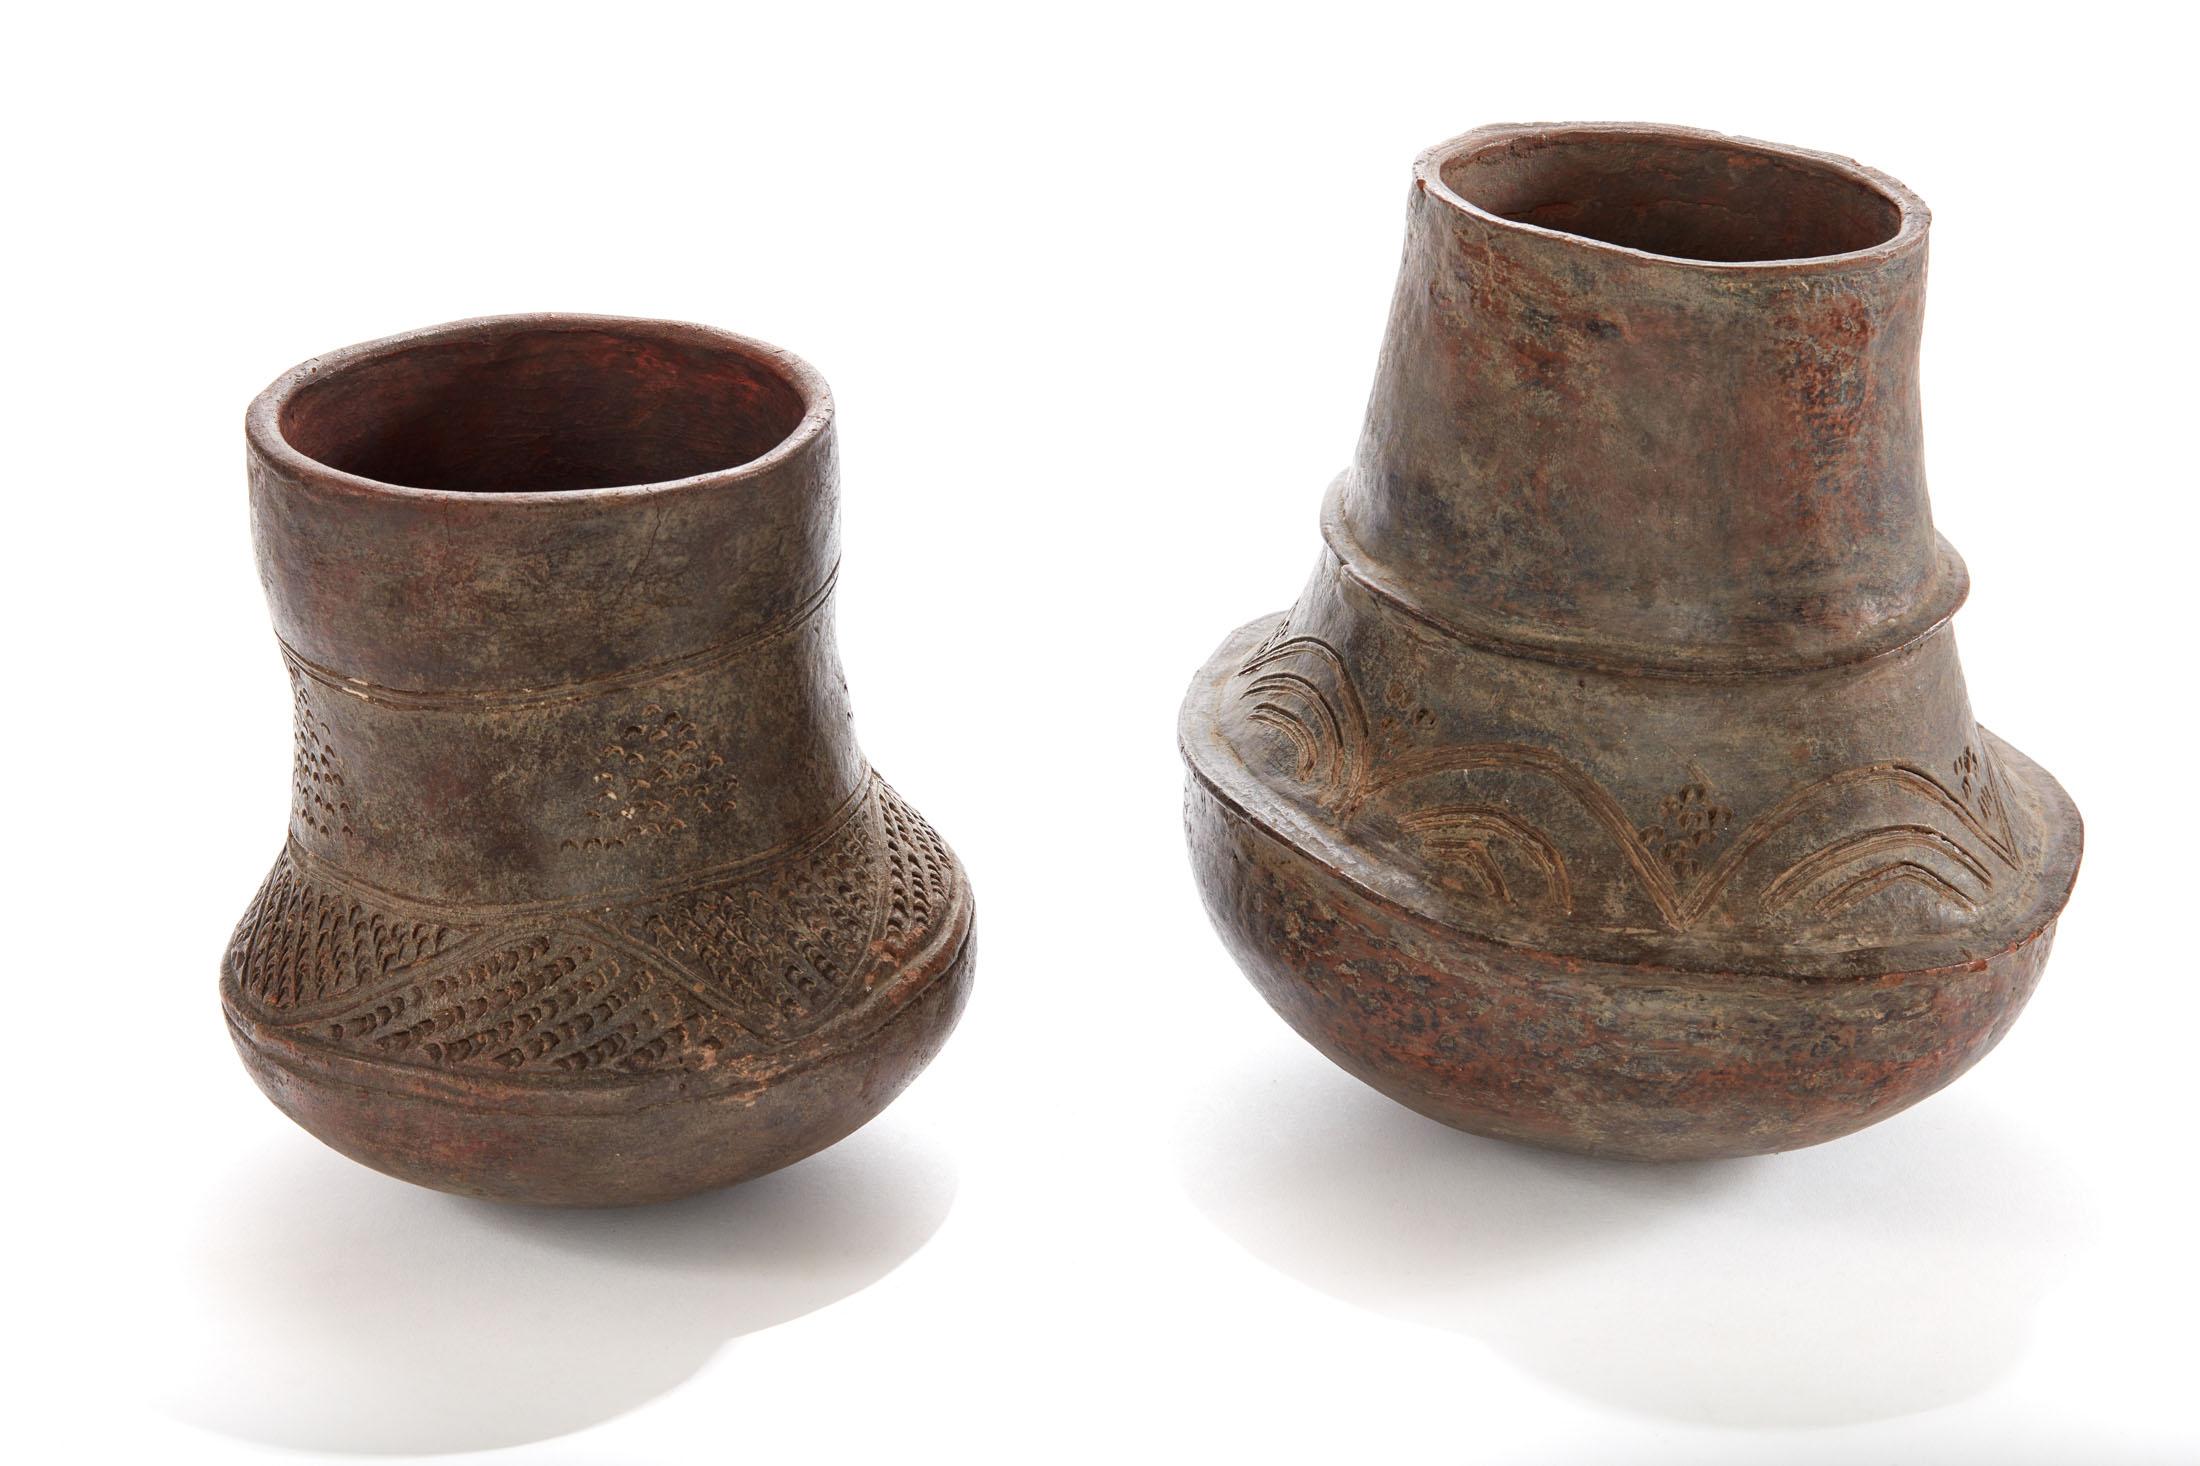 Two pieces of a pair of early 20th century etched African Vessels from Mali
The patina is gorgeous on this pair of storage vessels from Mali. Classic patterned etchings
Sold separately. 

Dimensions:
Larger vessel is 10.5 in. H and has a 10 in.